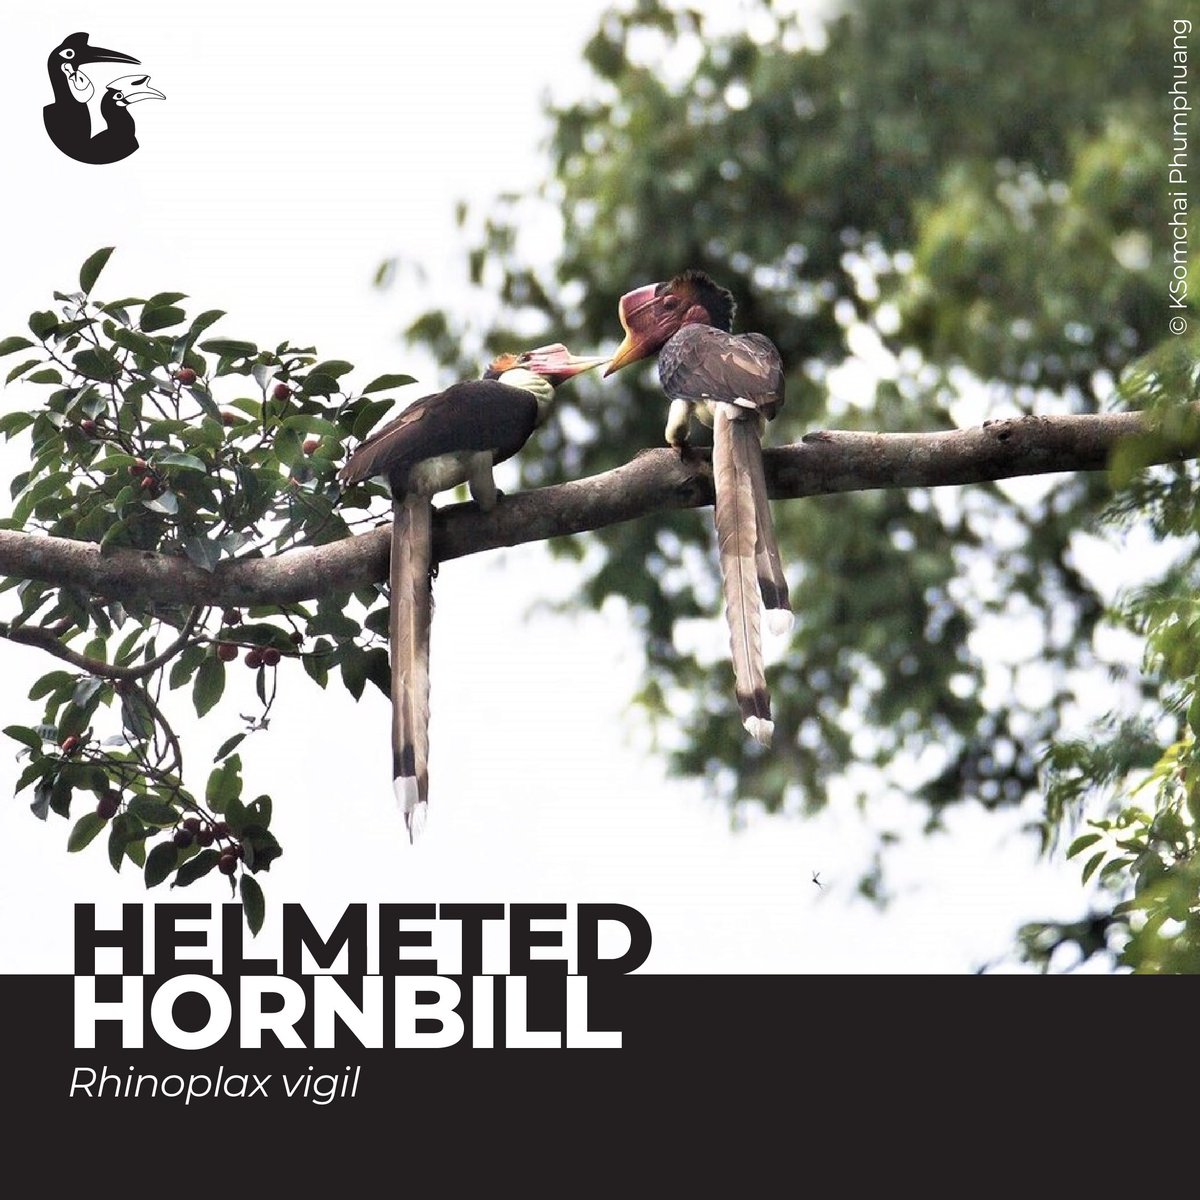 Helmeted hornbill is different from all other hornbills. The casque of Helmeted Hornbill is almost solid block of keratin, which is a helmet-like structure on the upper half of its beak and is used in head-to-head combat among males. 📸 : Somchai Phumphuang